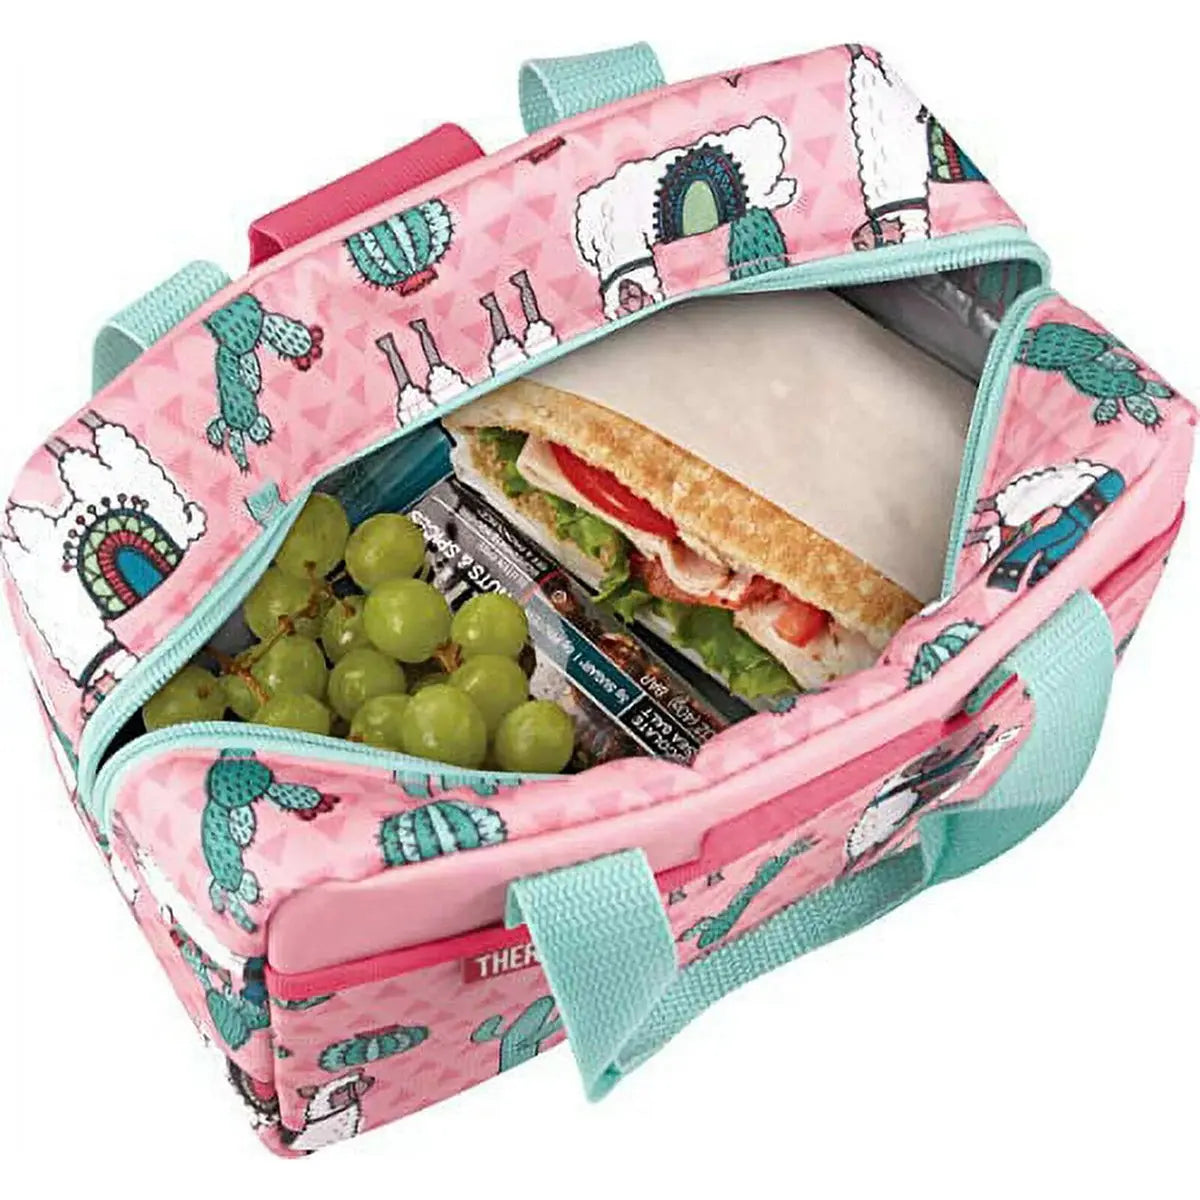 Thermos Kid's Funtainer Desert Llama Lunch Duffle Bag - Pink/Teal Thermos